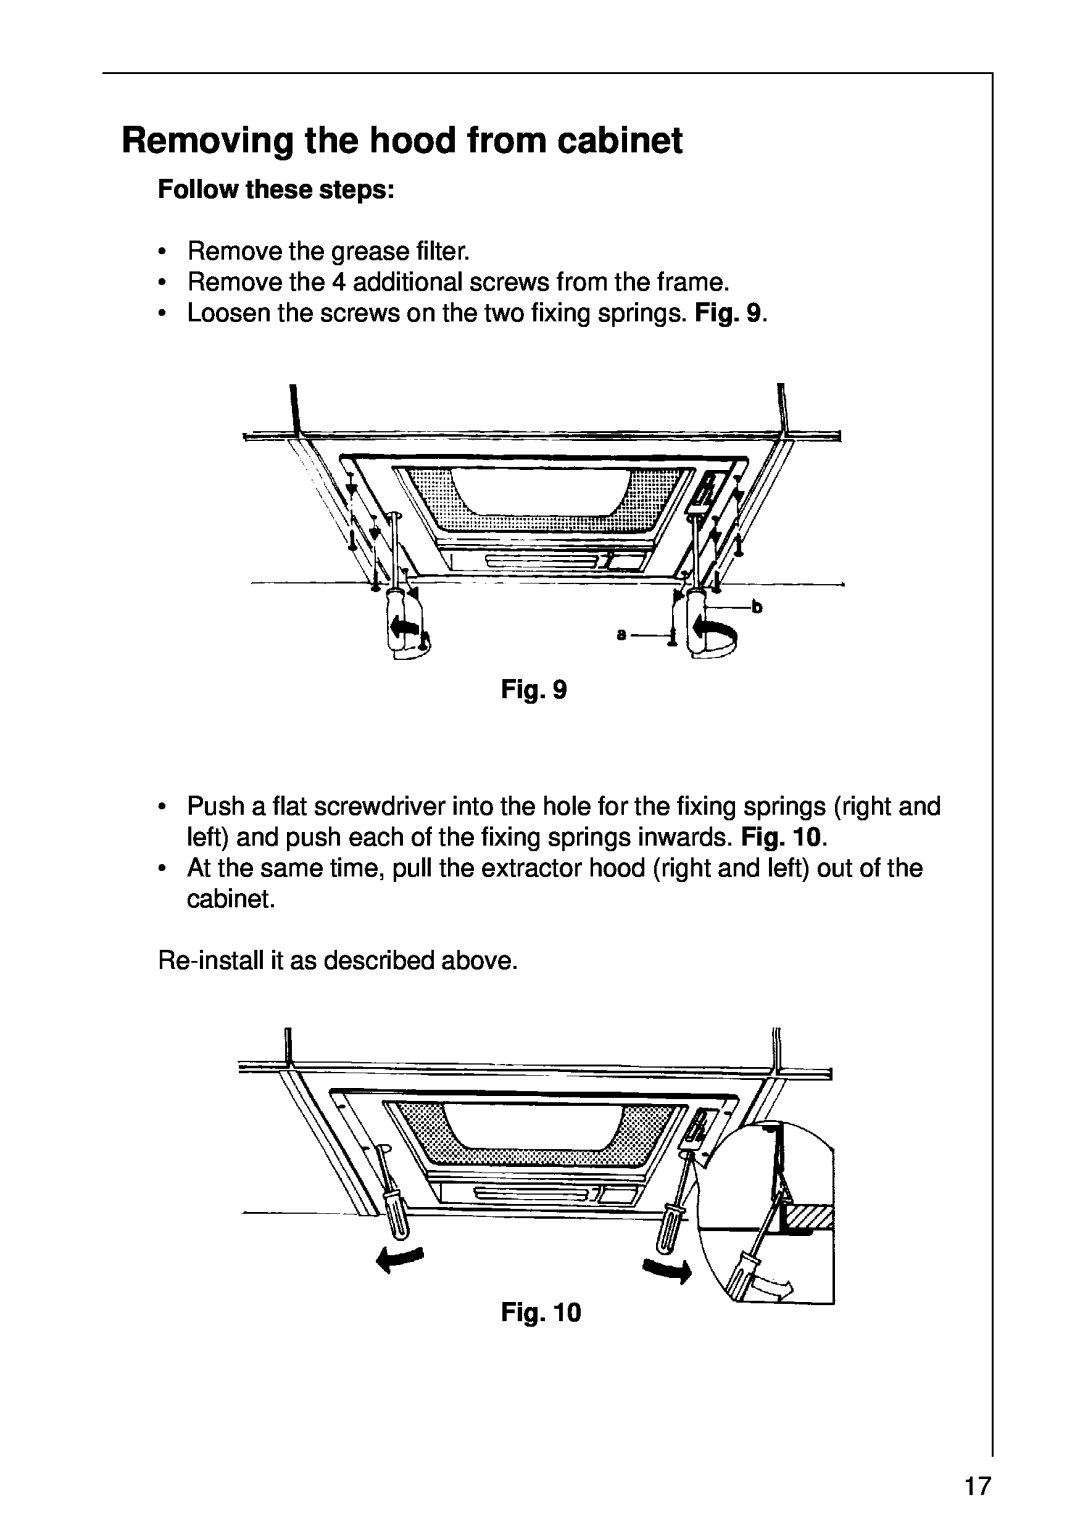 Electrolux CHDL 4150, 5708 D, 570 D, DL 6250 installation instructions Removing the hood from cabinet, Follow these steps 